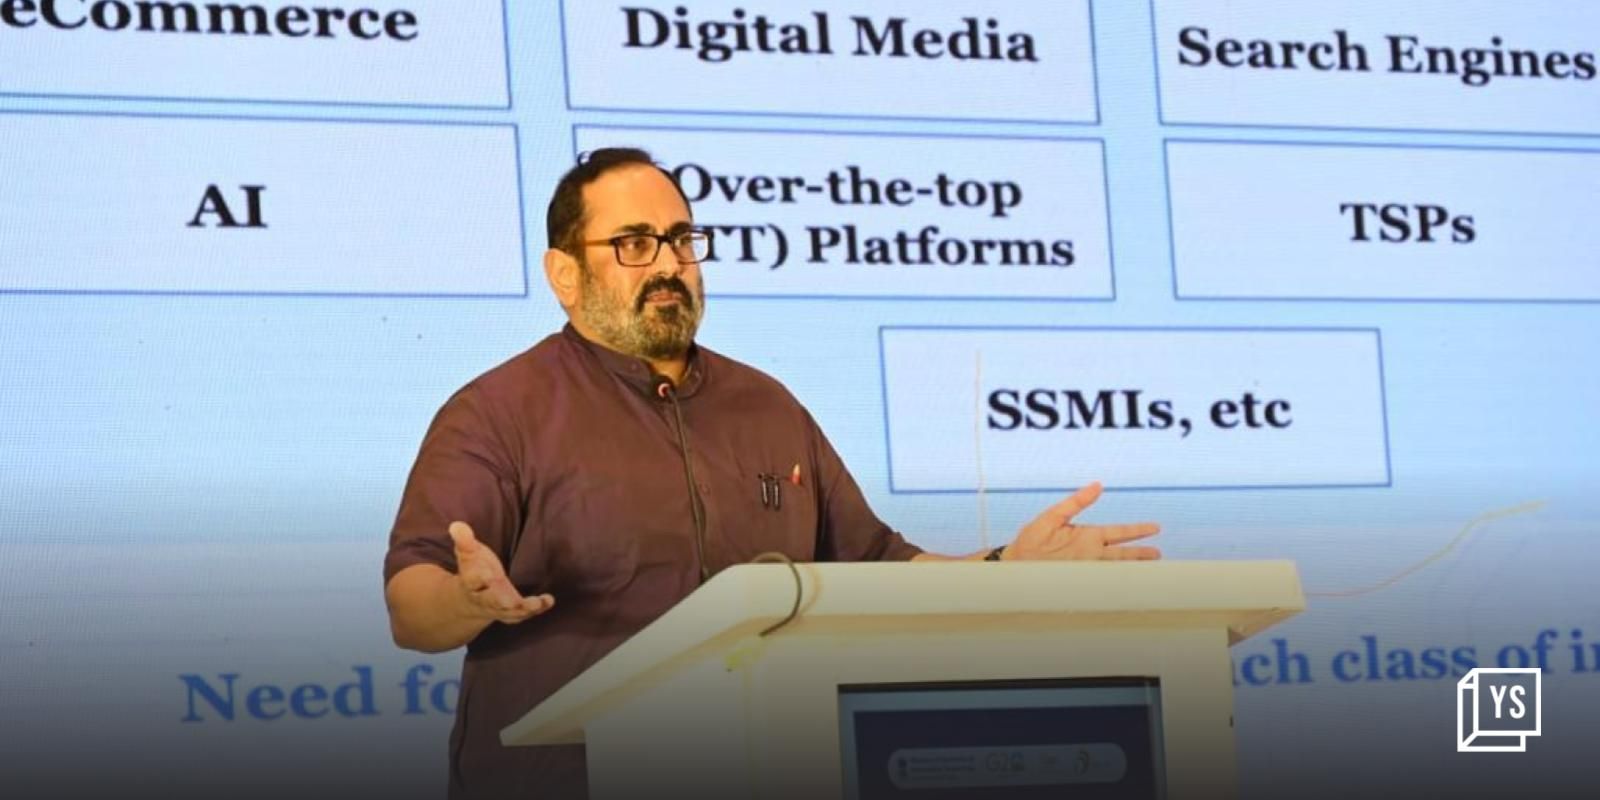 Startups in India to grow 10X in 4-5 years: Rajeev Chandrasekhar